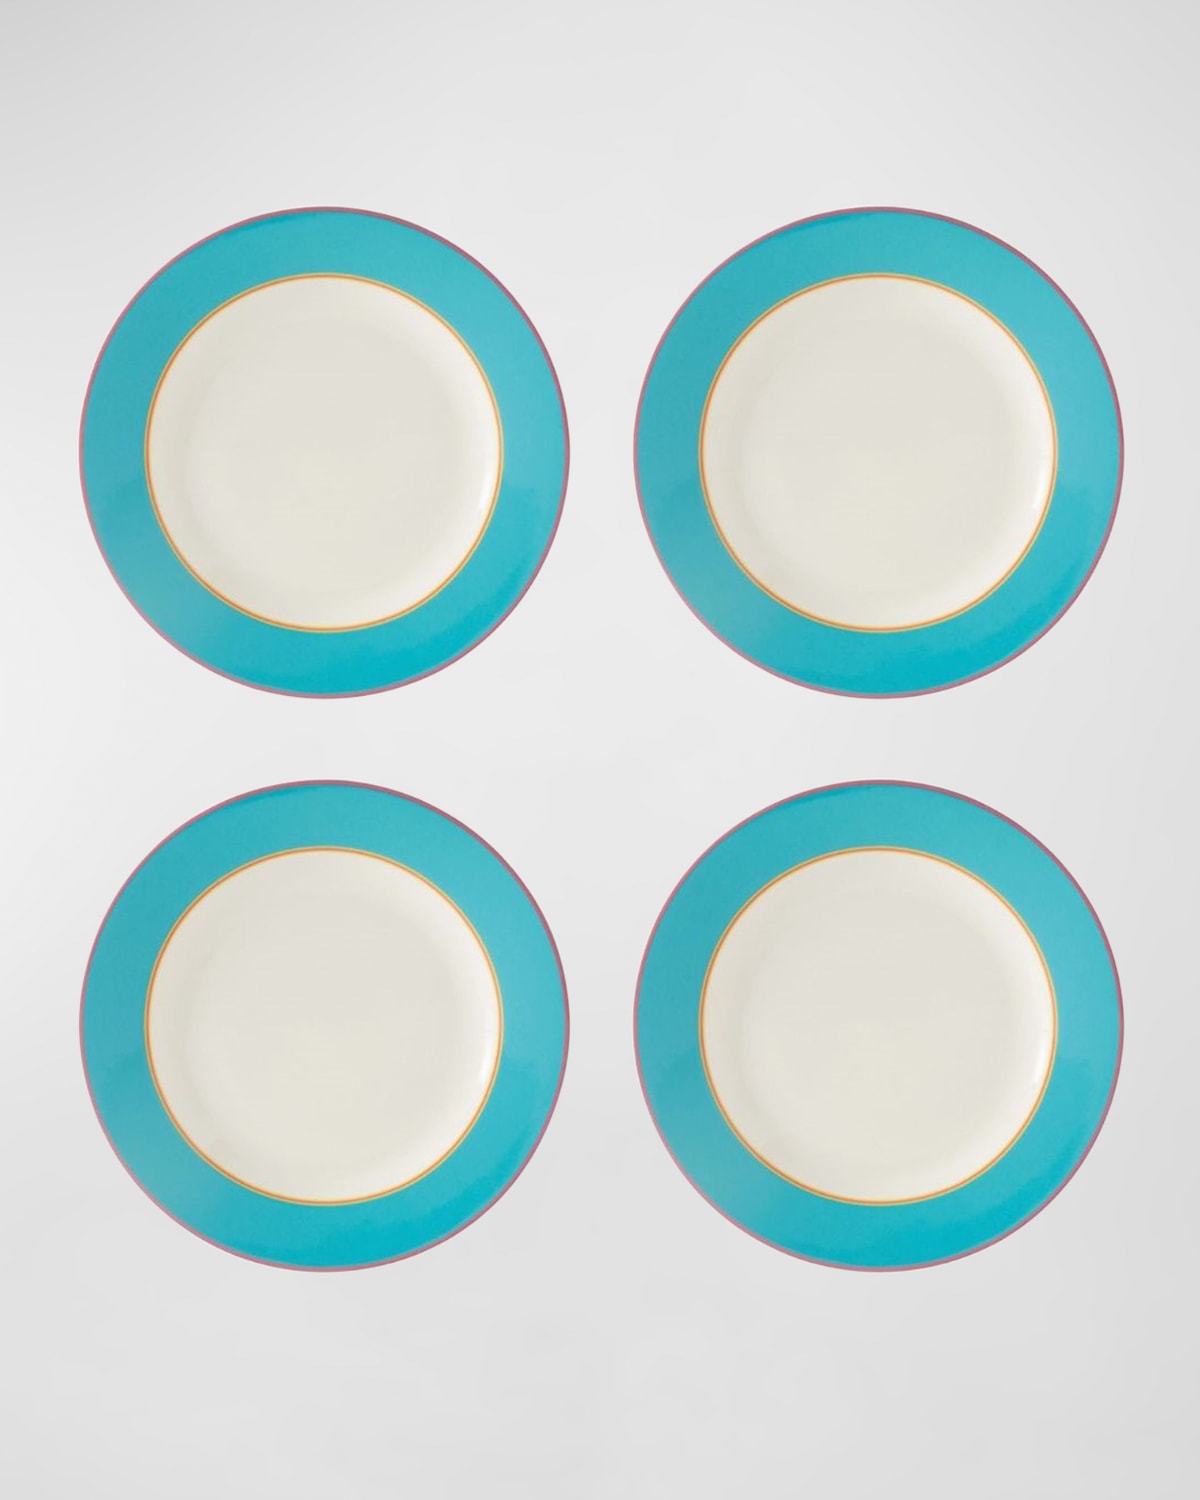 Kit Kemp For Spode Calypso Salad Plates 9.5", Set Of 4 In Blue